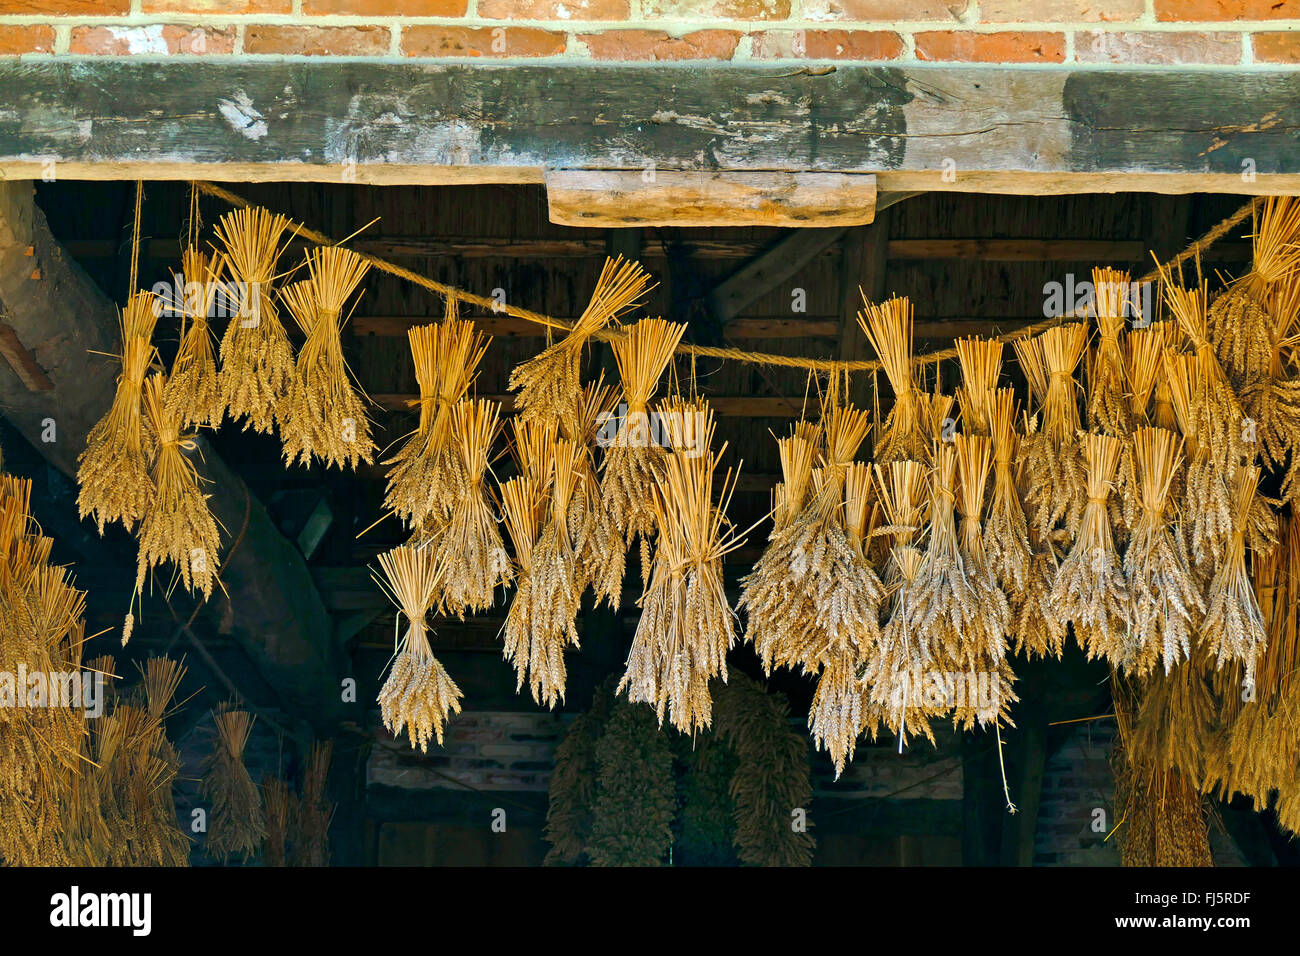 bread wheat, cultivated wheat (Triticum aestivum), dried wheat sheaves as decoration in a farmhouse, Germany, Lower Saxony, Ammerland Stock Photo